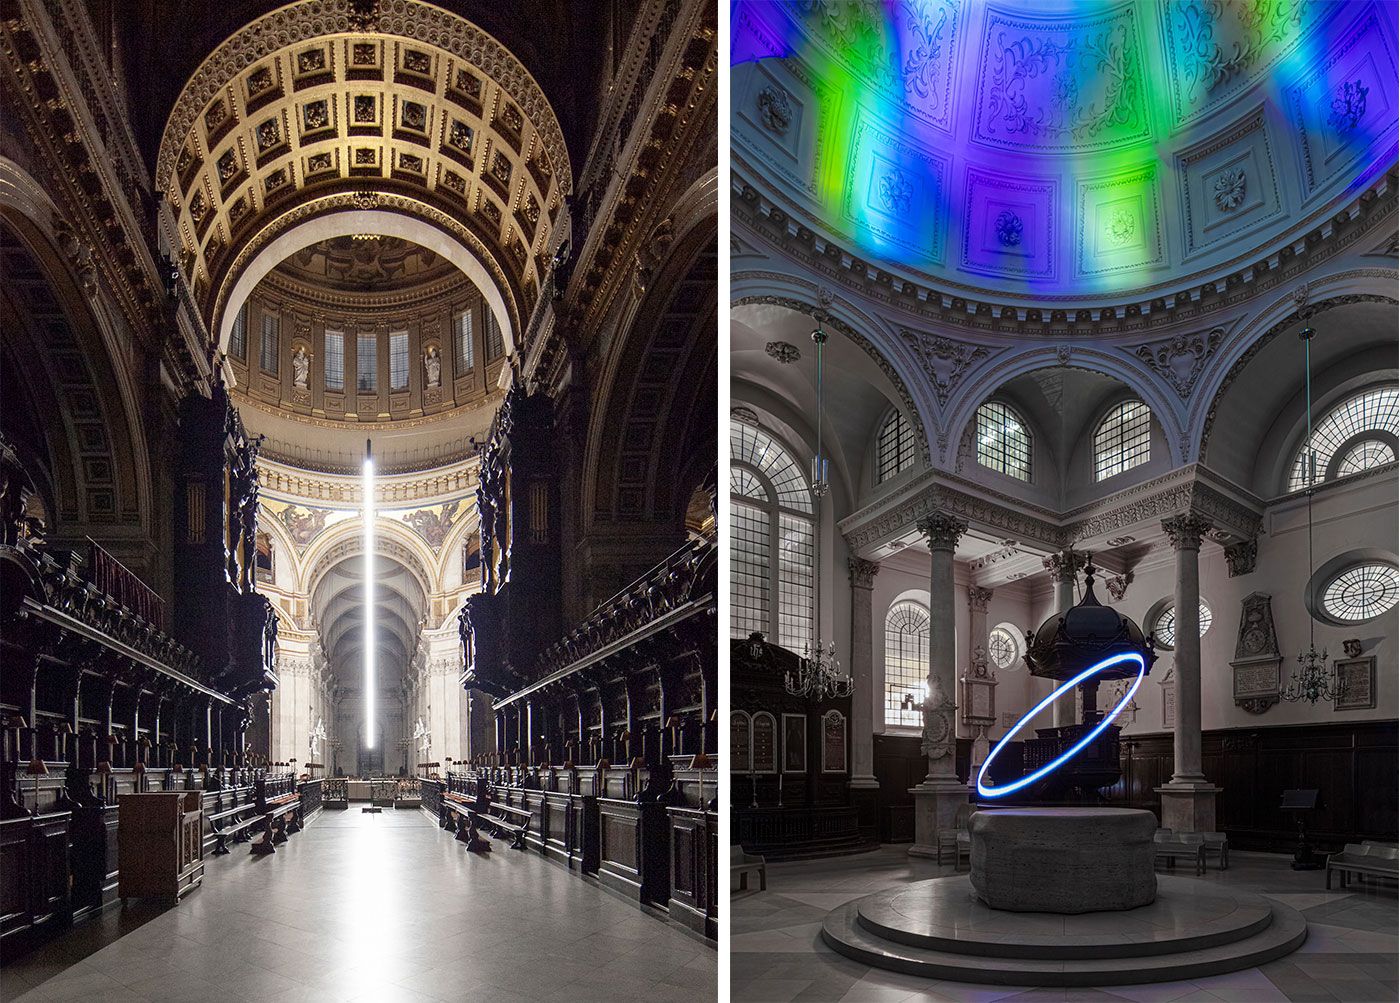 Fresh light on Wren: new installations interact with the domed